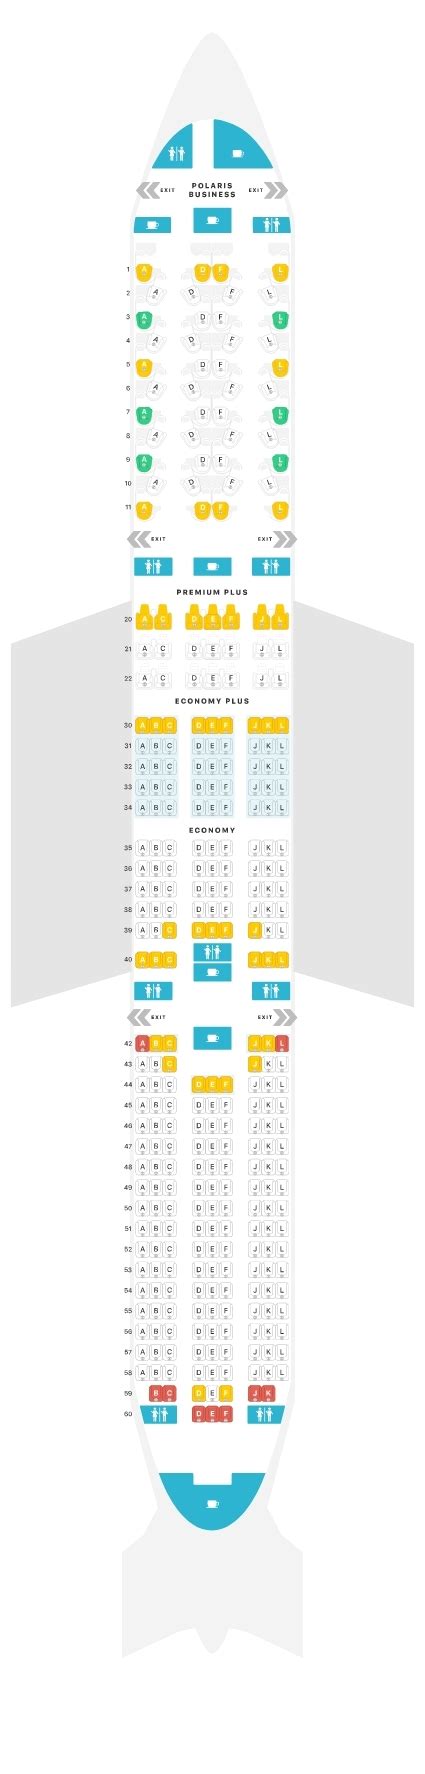 United 787 10 Seat Map Elcho Table